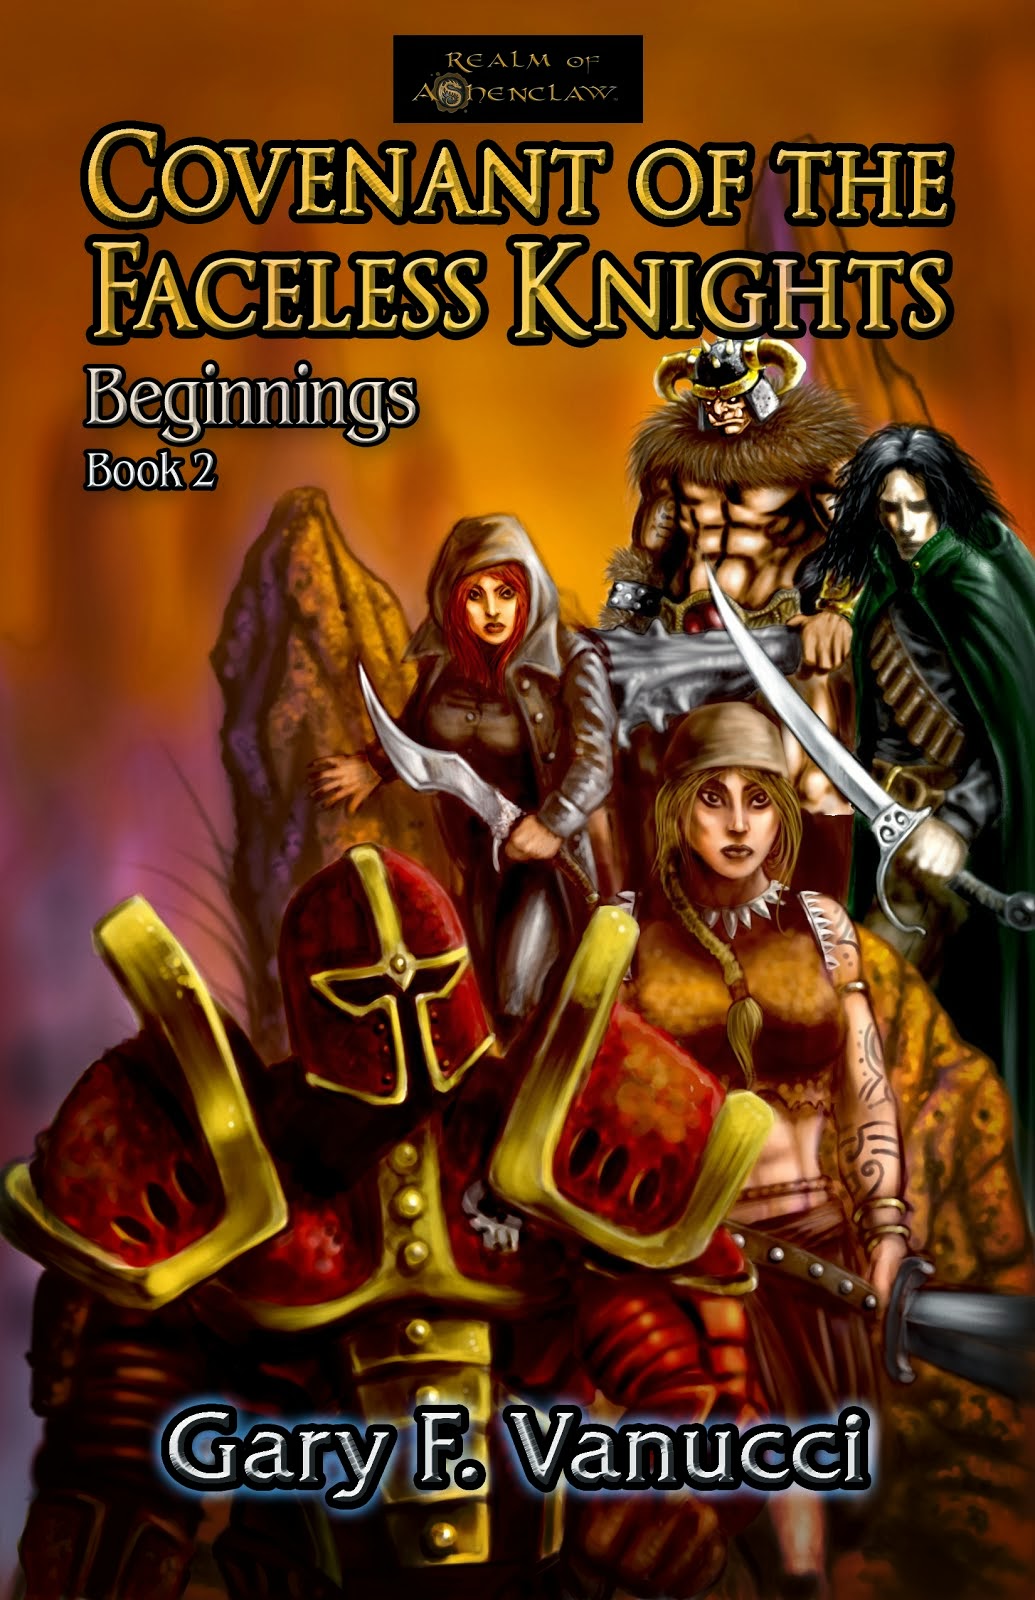 Covenant of the Faceless Knights